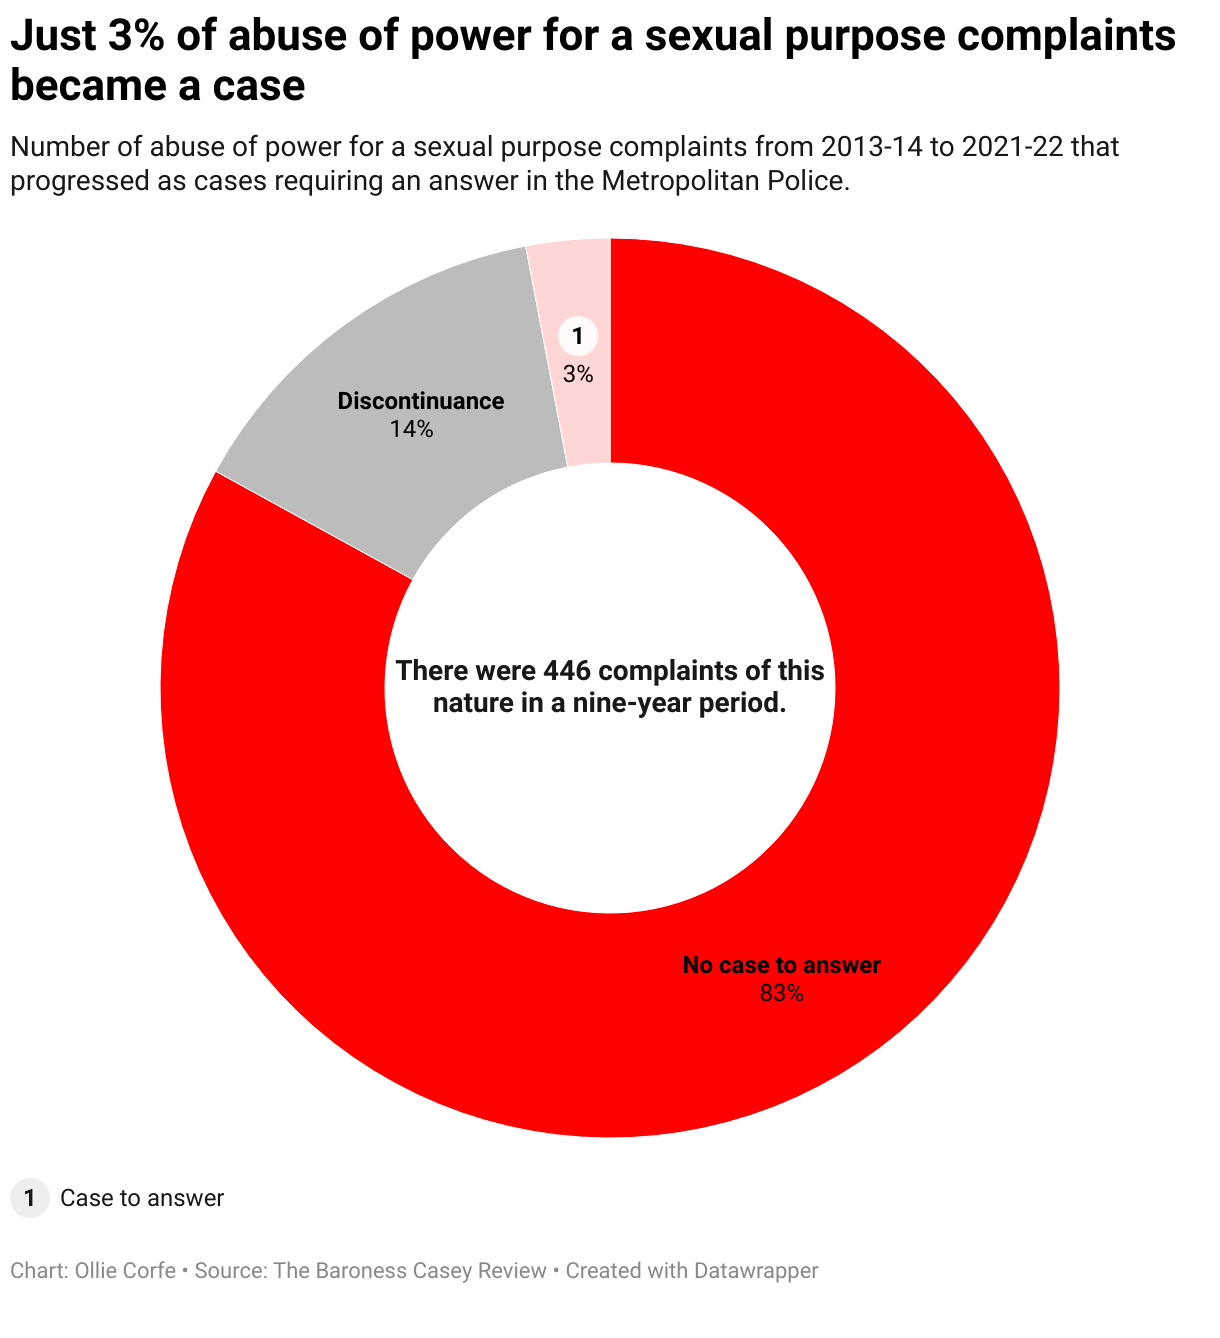 Donut chart showing cases following an abuse of power for sexual purpose complaint.